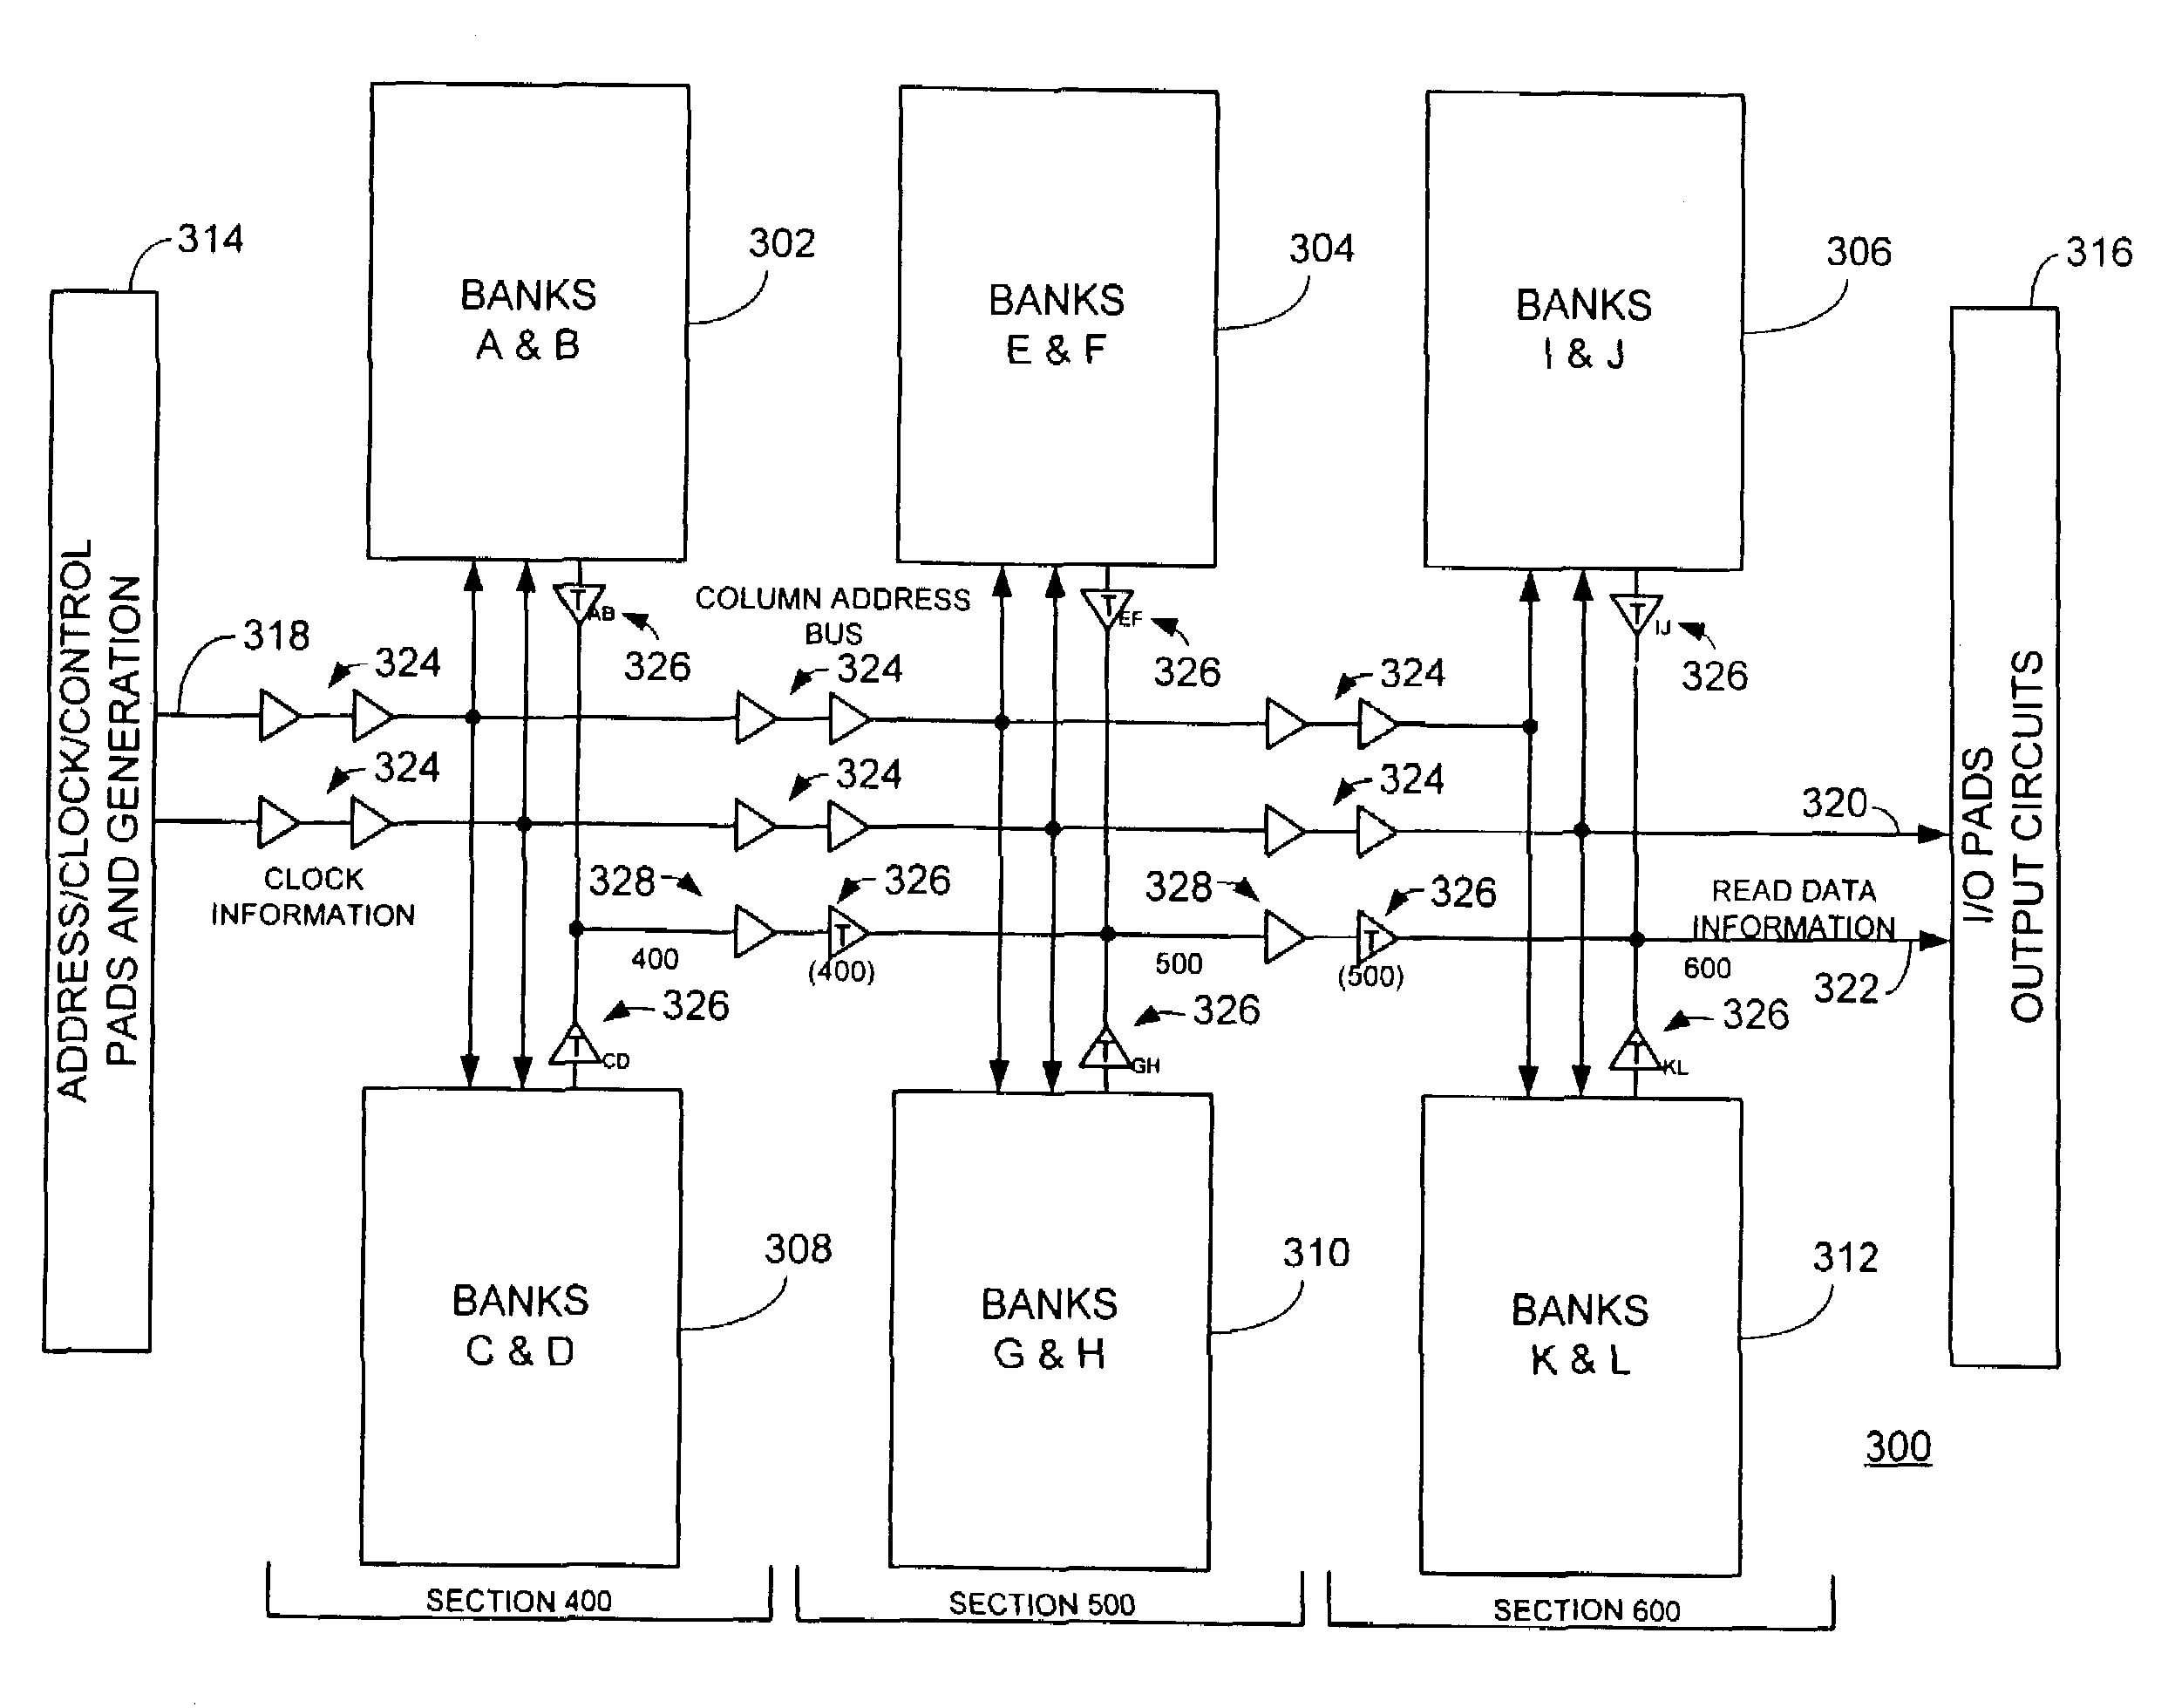 Integrated circuit memory architecture with selectively offset data and address delays to minimize skew and provide synchronization of signals at the input/output section